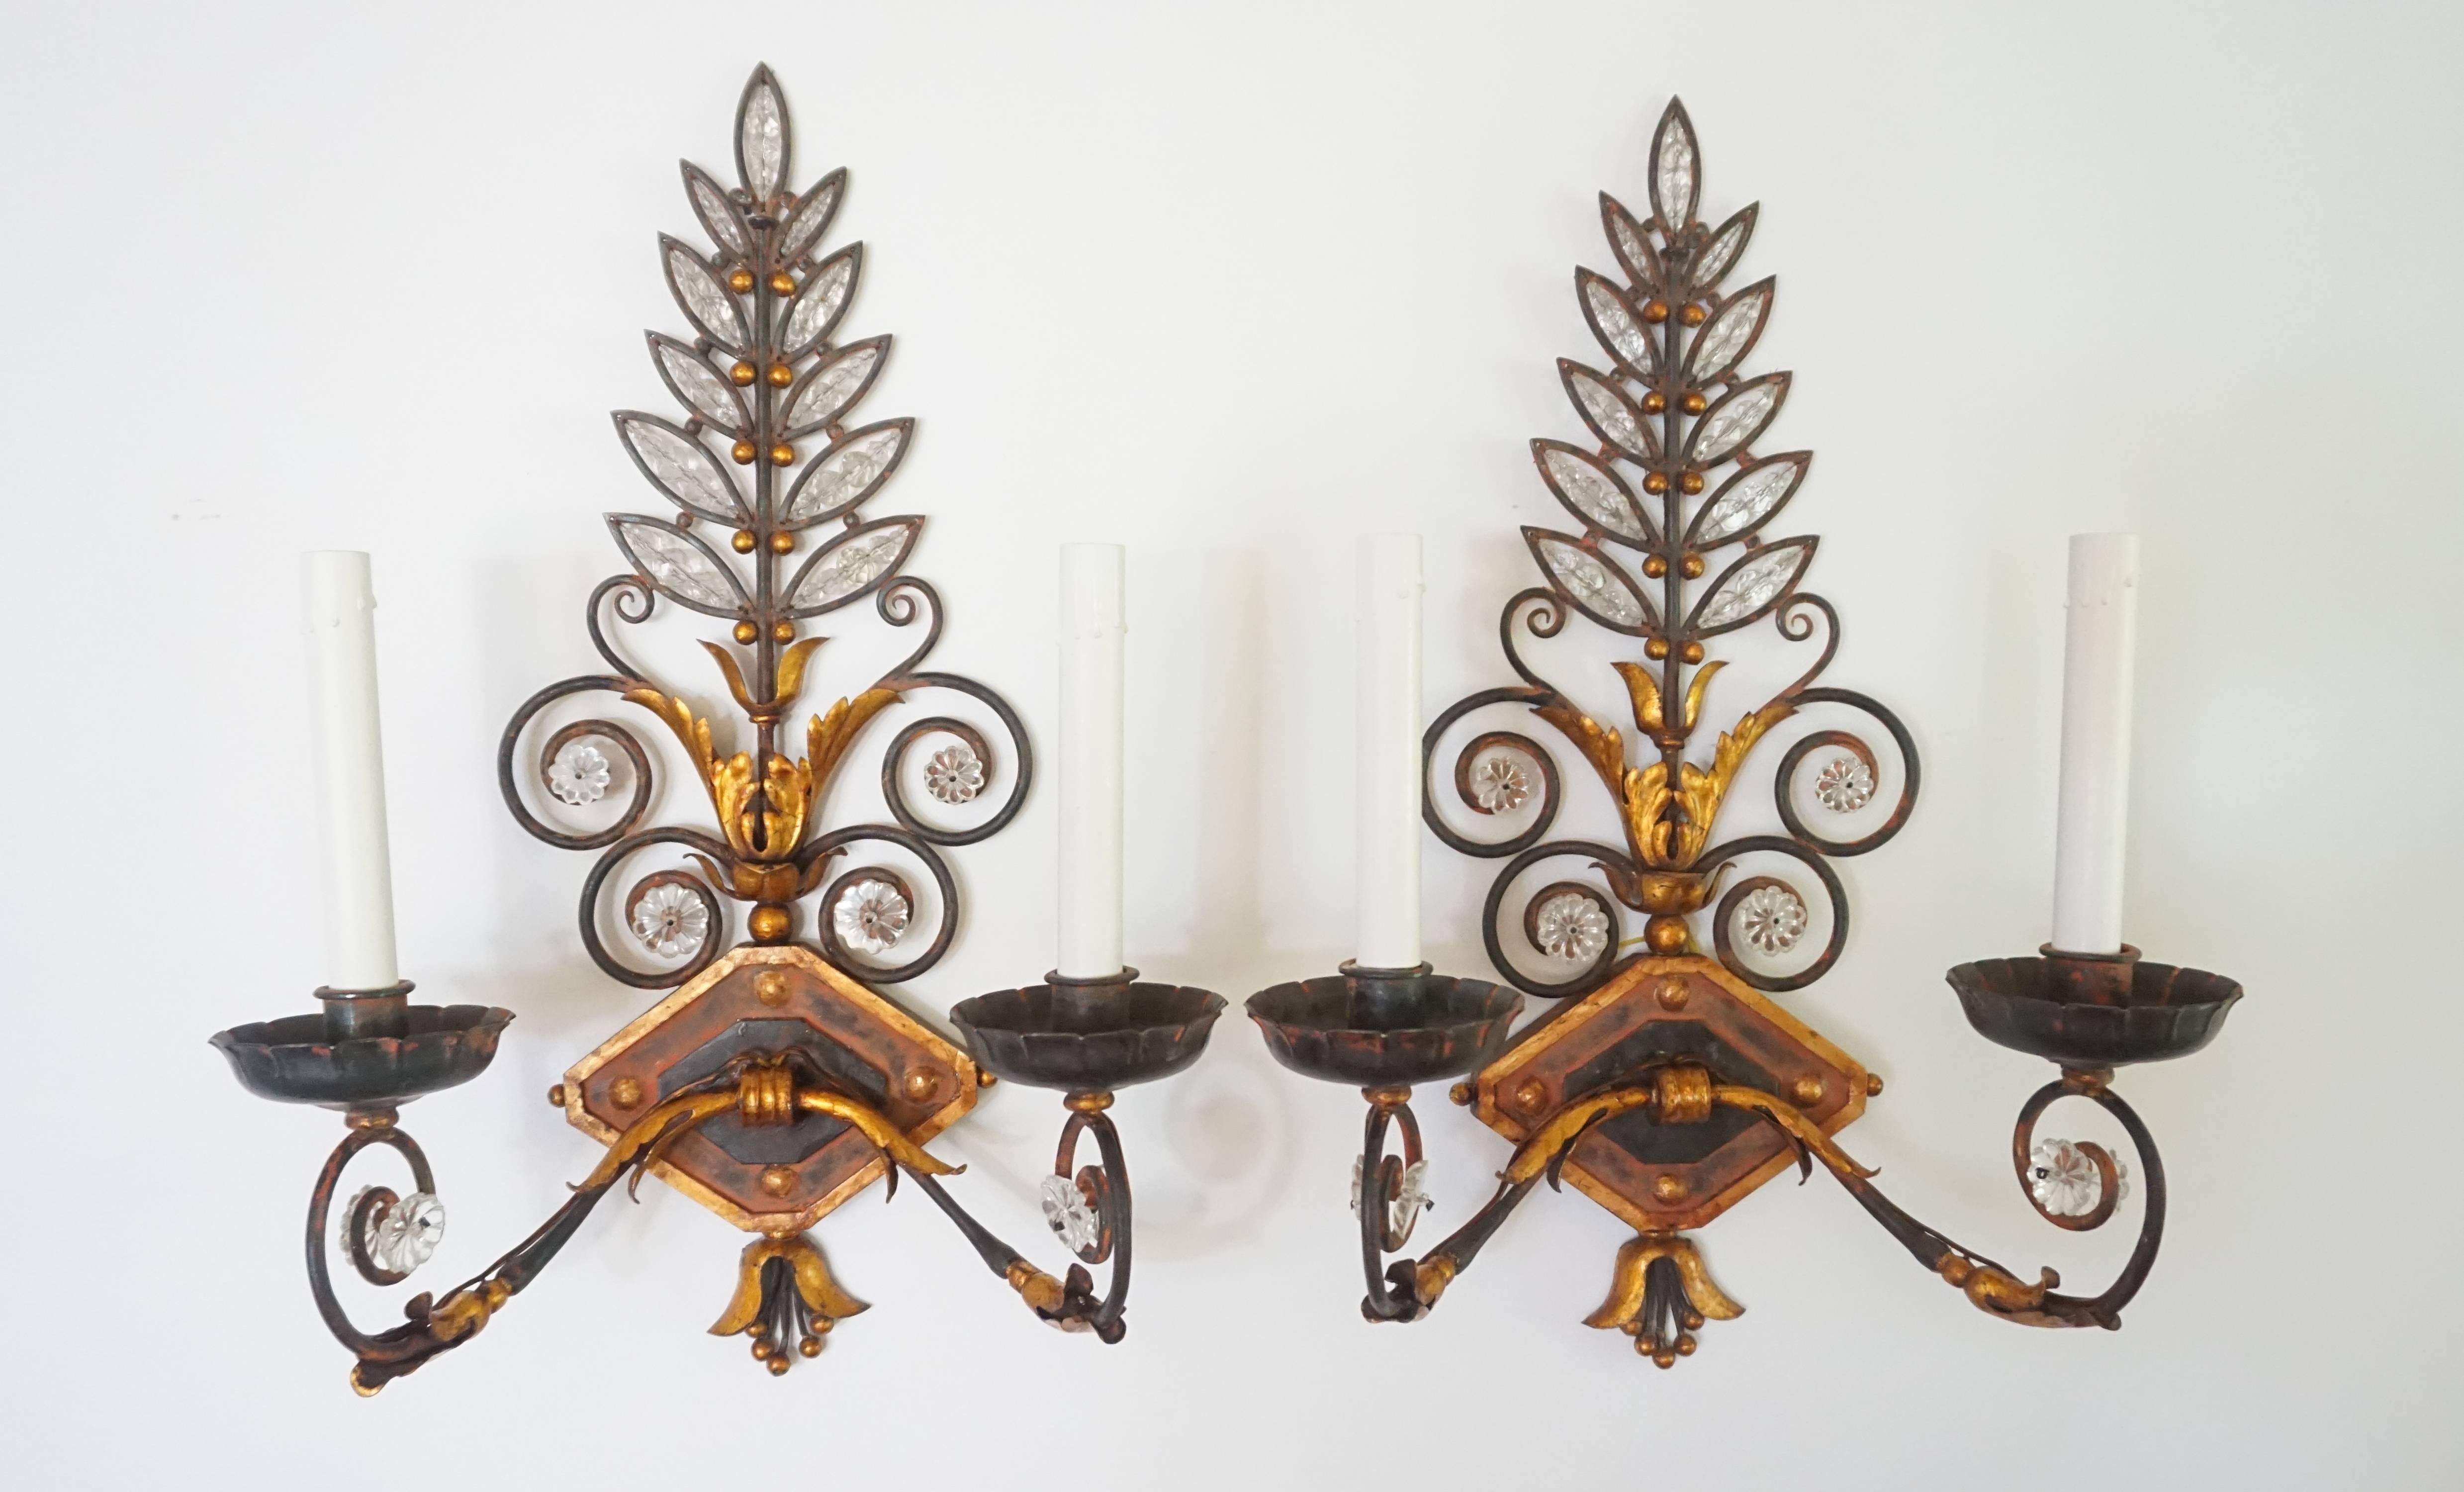 Pair of crystal and wrought iron two-light wall sconces attributed to Maison Baguès Paris, circa 1925, having parcel-gilt and red painted finish on open hand-wrought foliate and acanthus back-plates encrusted with flower-form and facet-cut bead